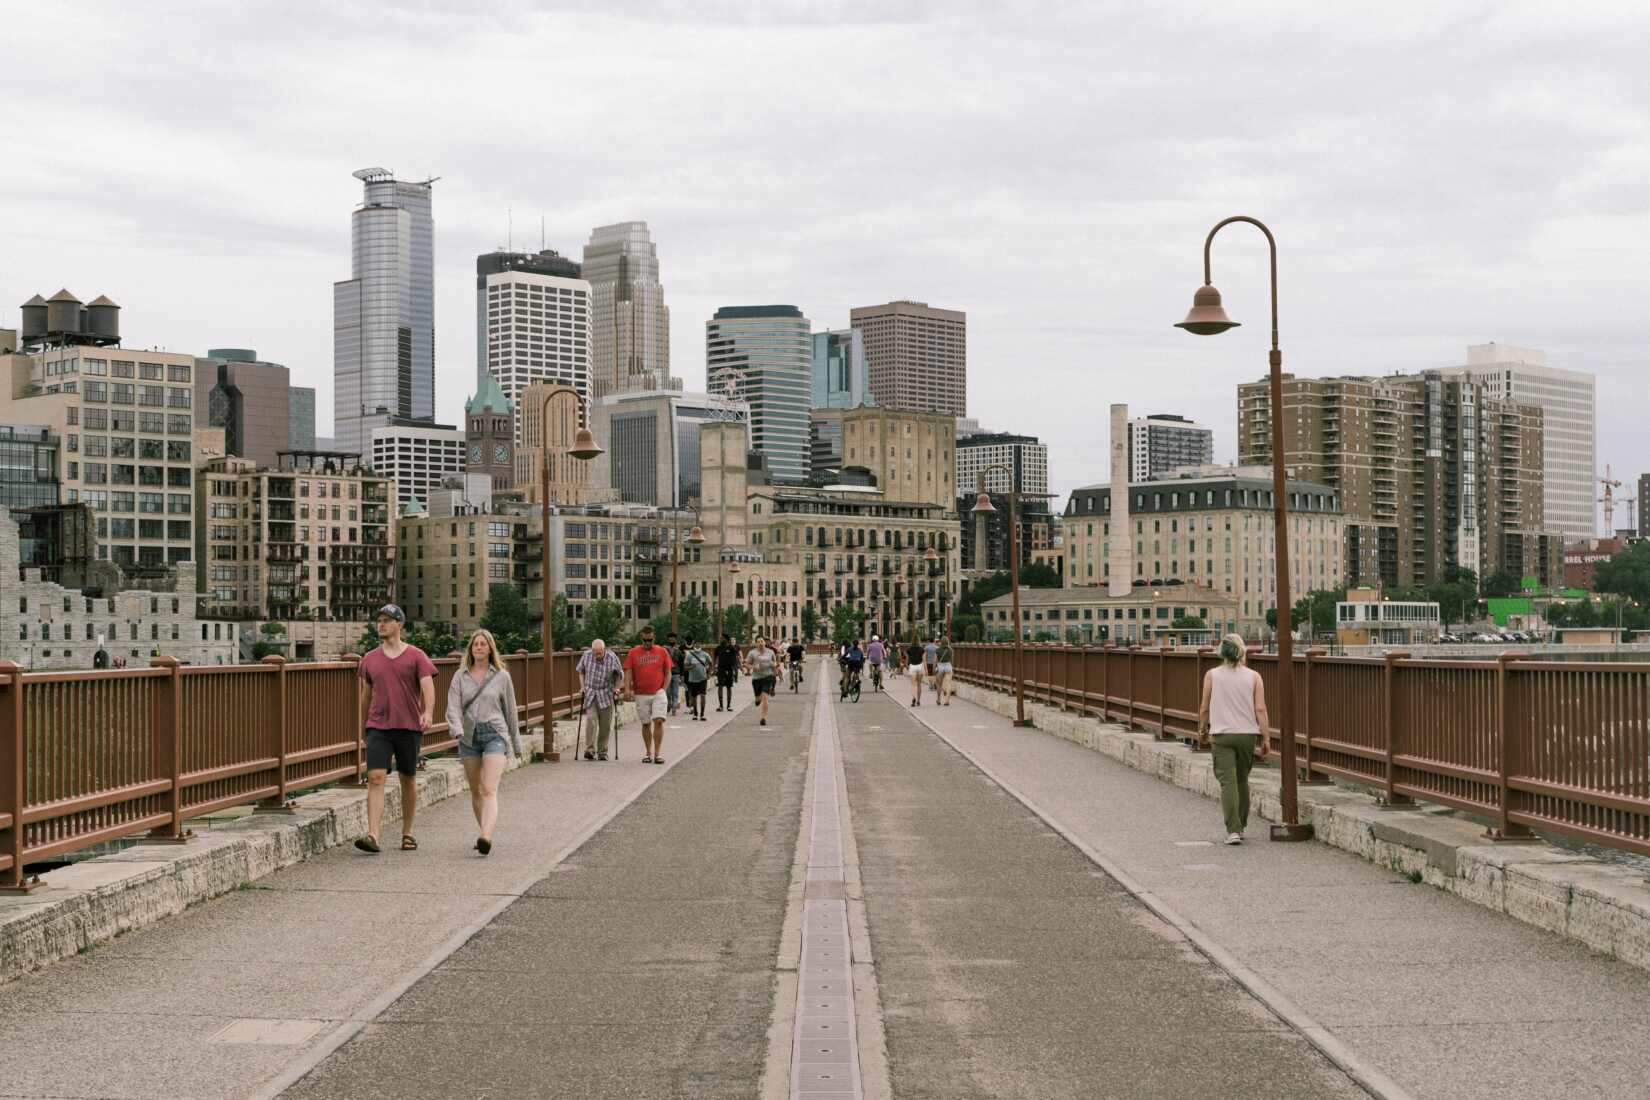 Minneapolis Stone Arch Bridge, a wheelchair accessible activity that increases community involvement for individuals with disabilities